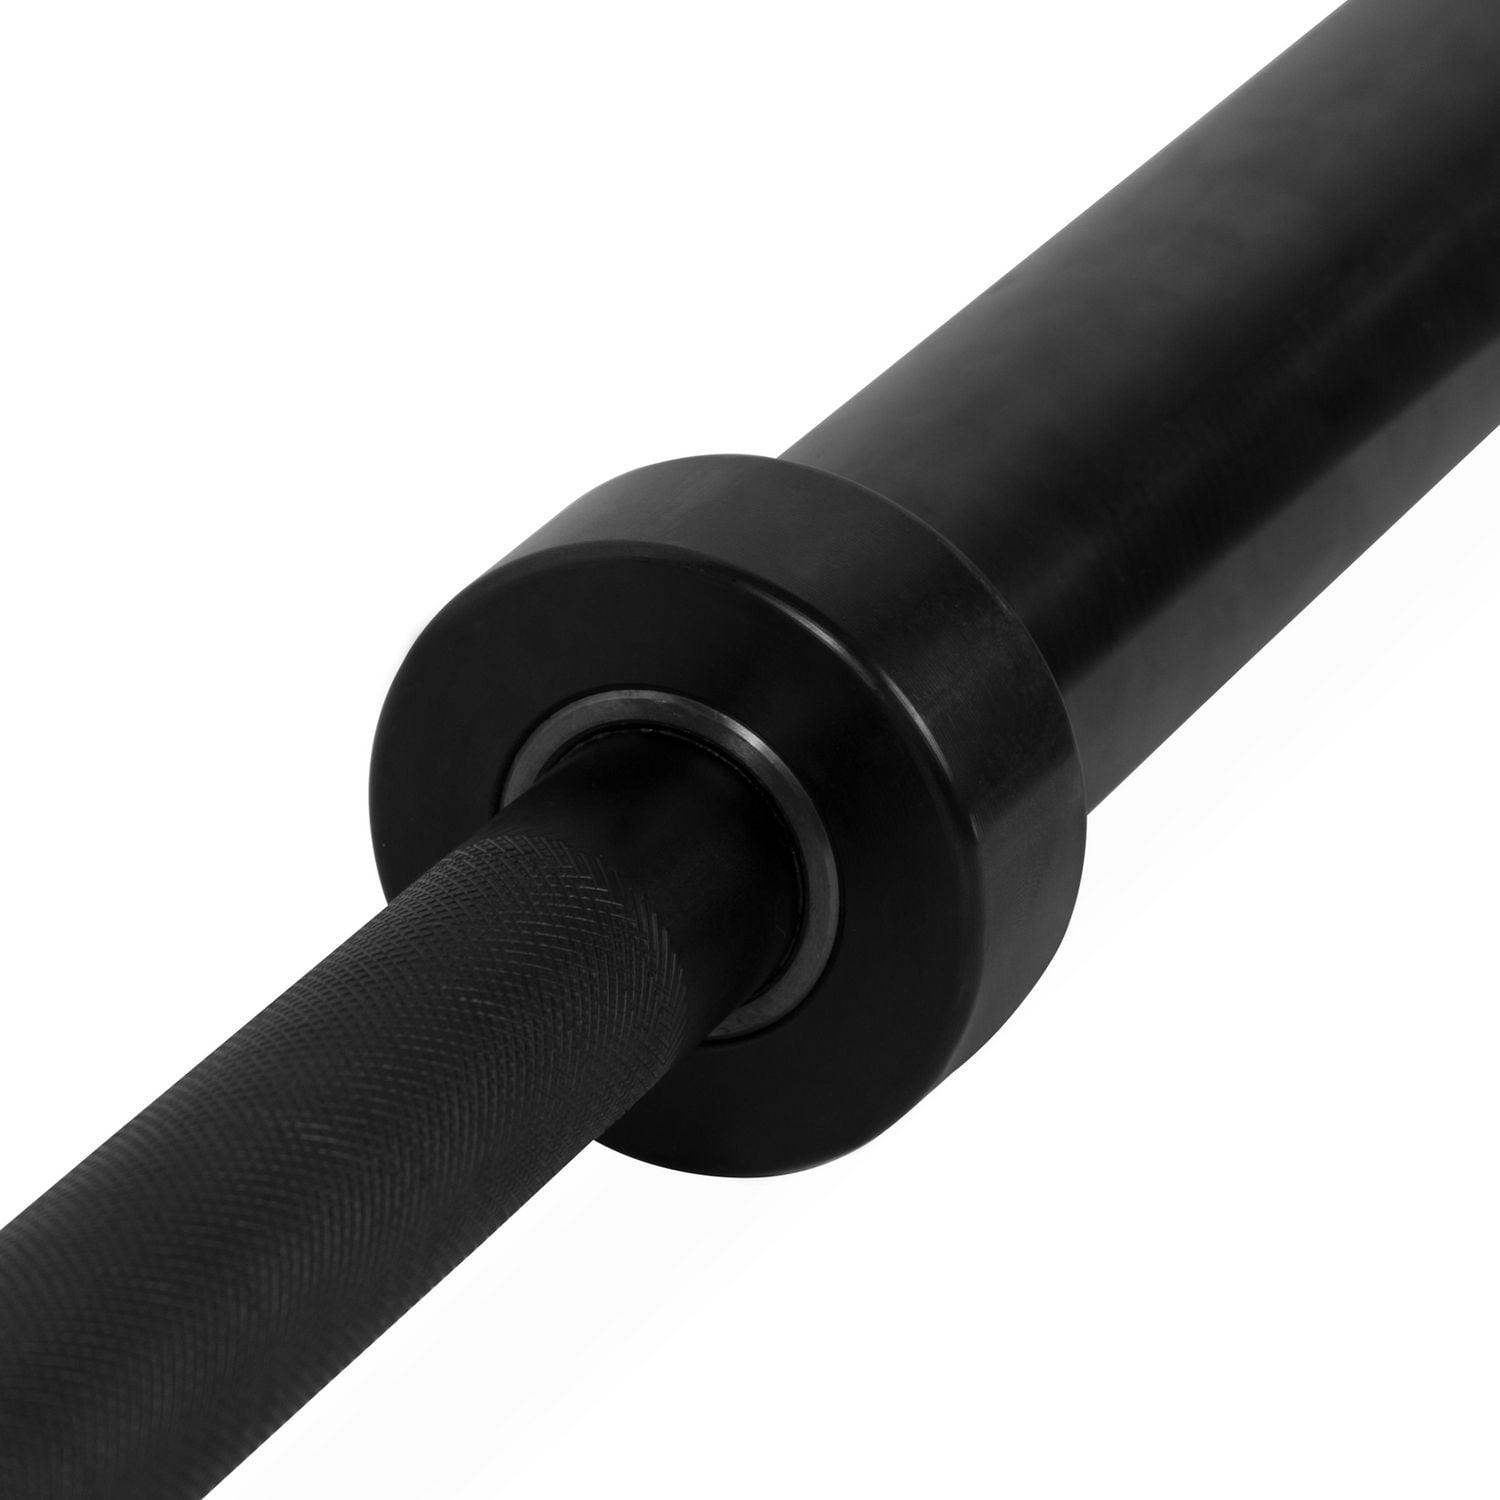 CAP Barbell 5 ft Olympic Weight Bar, Black 